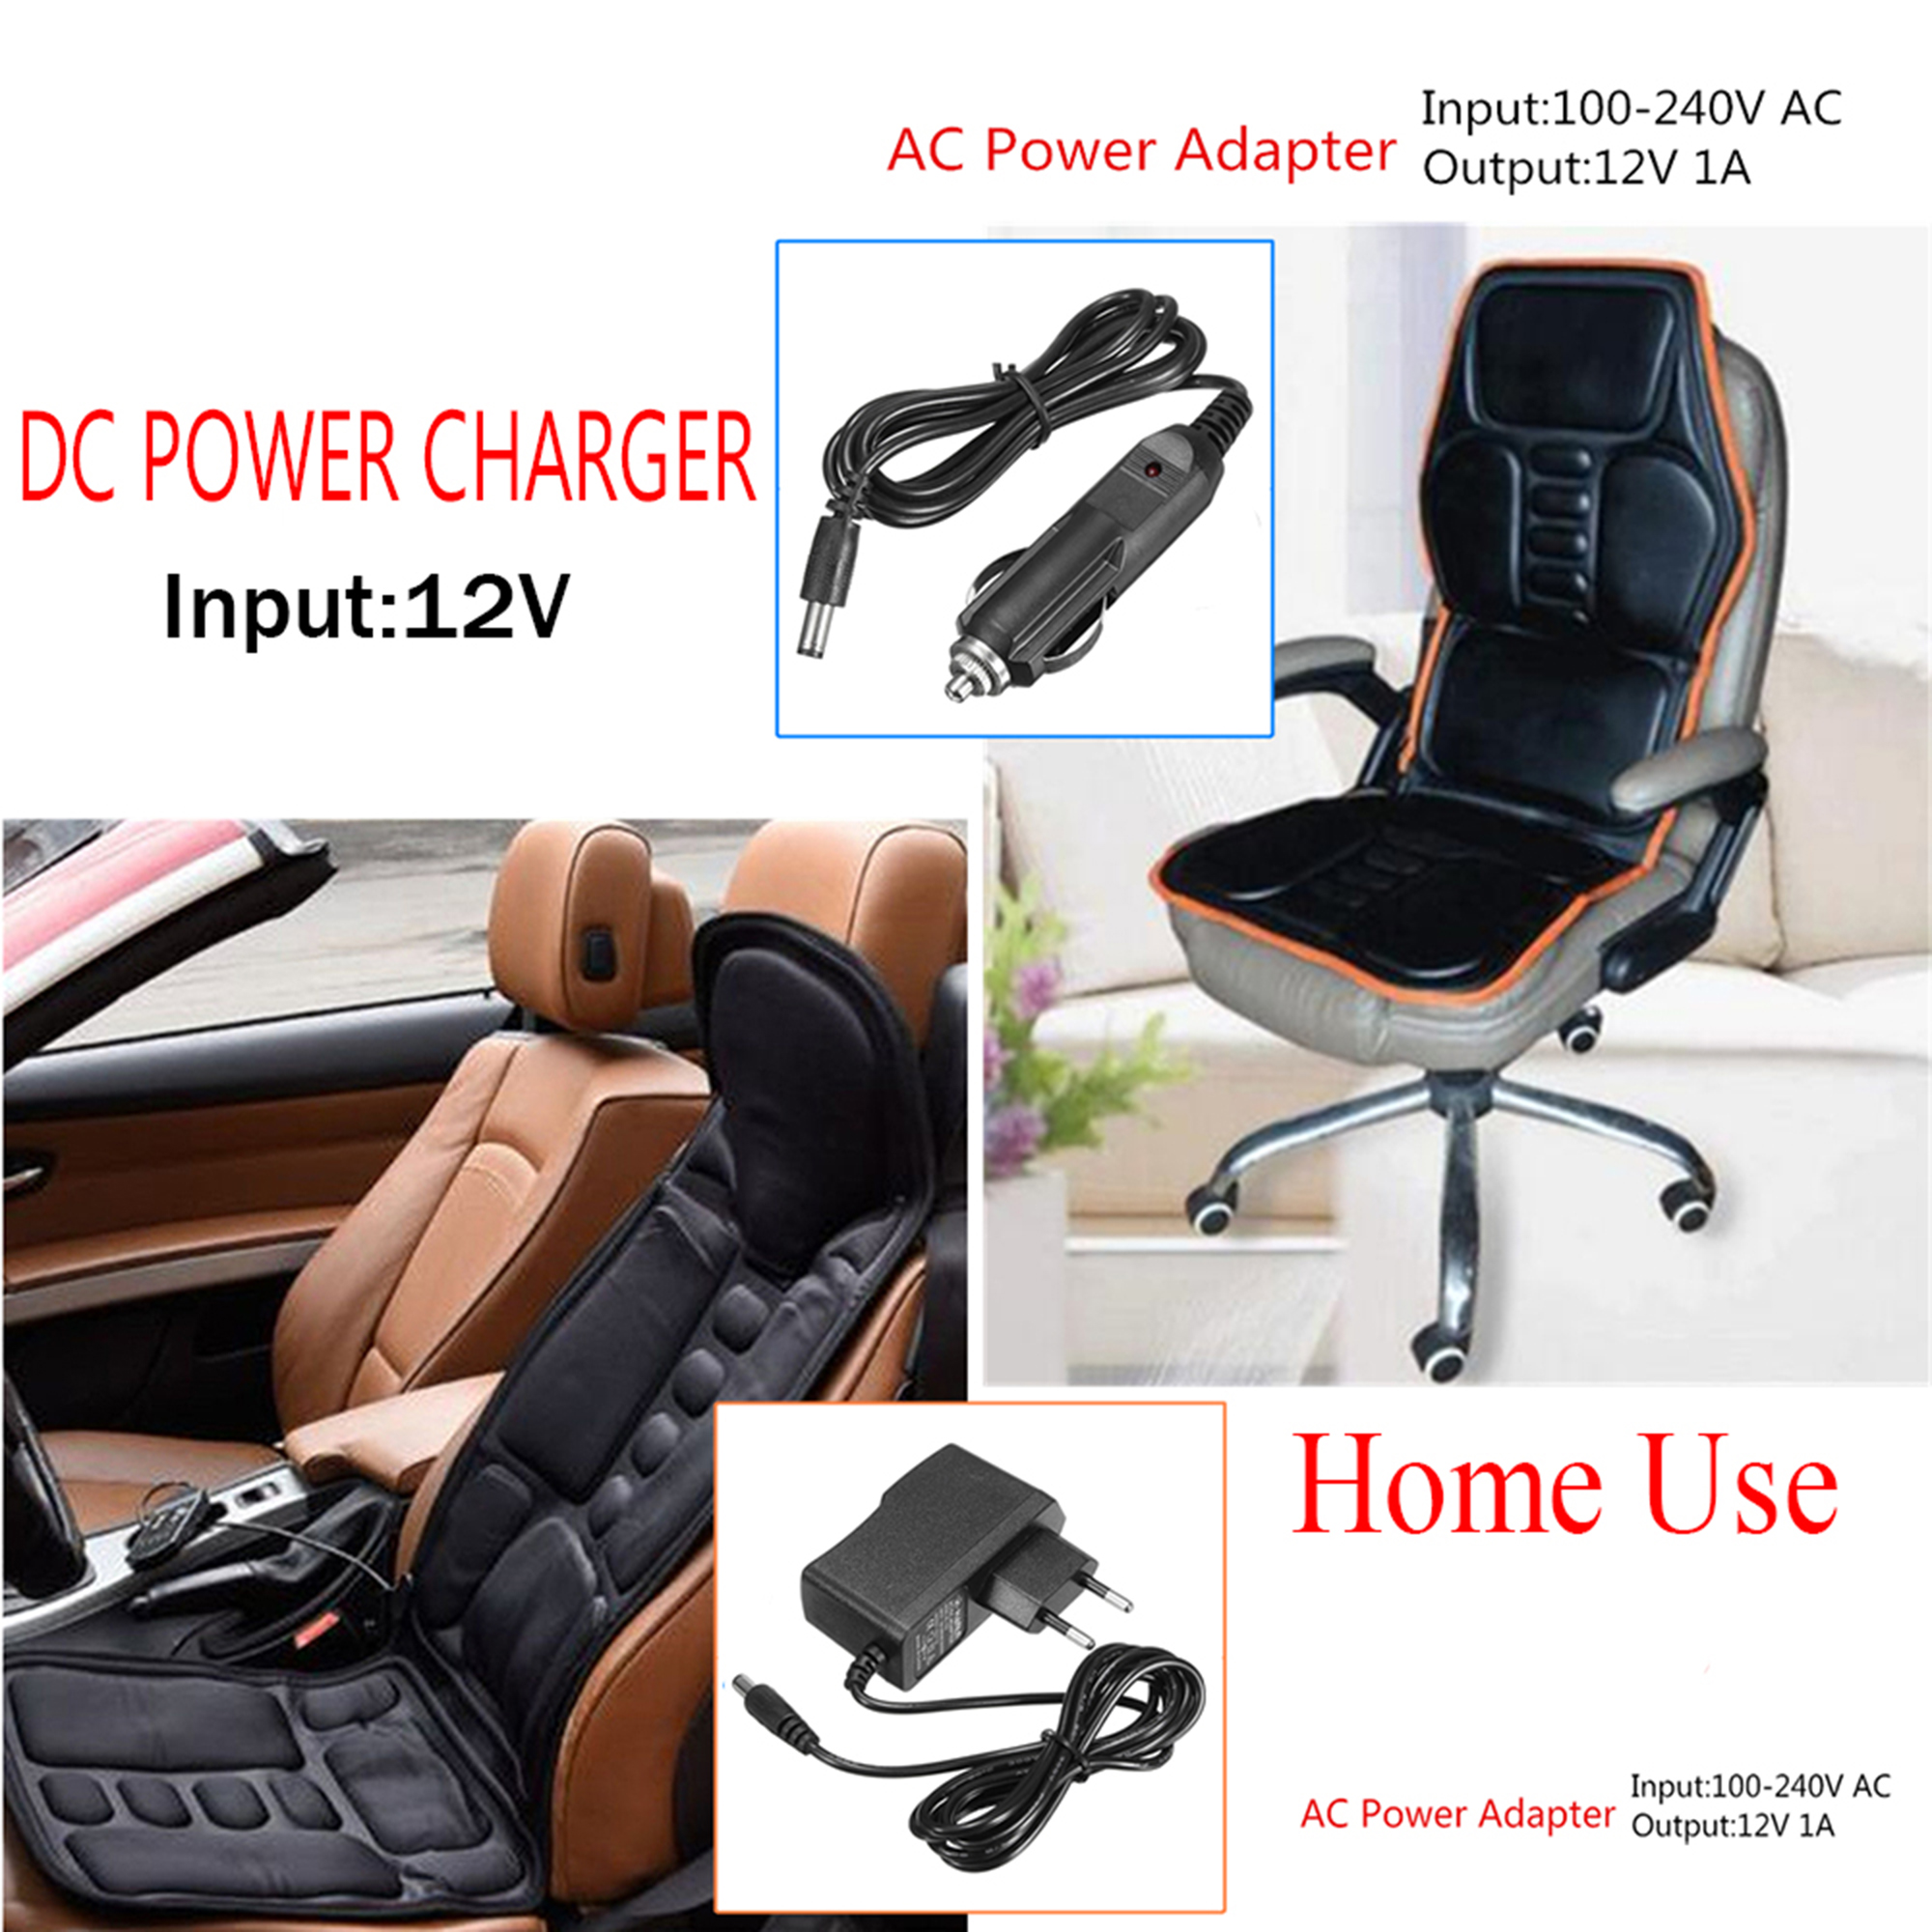 Youloveit Car Home Chair Seat Shiatsu Back and Neck Massager with Heat Kneading Massage at Home, Car, Office Massage Shiatsu Massagers Relieve Muscle Pain for Back Shoulder and Neck - image 2 of 7